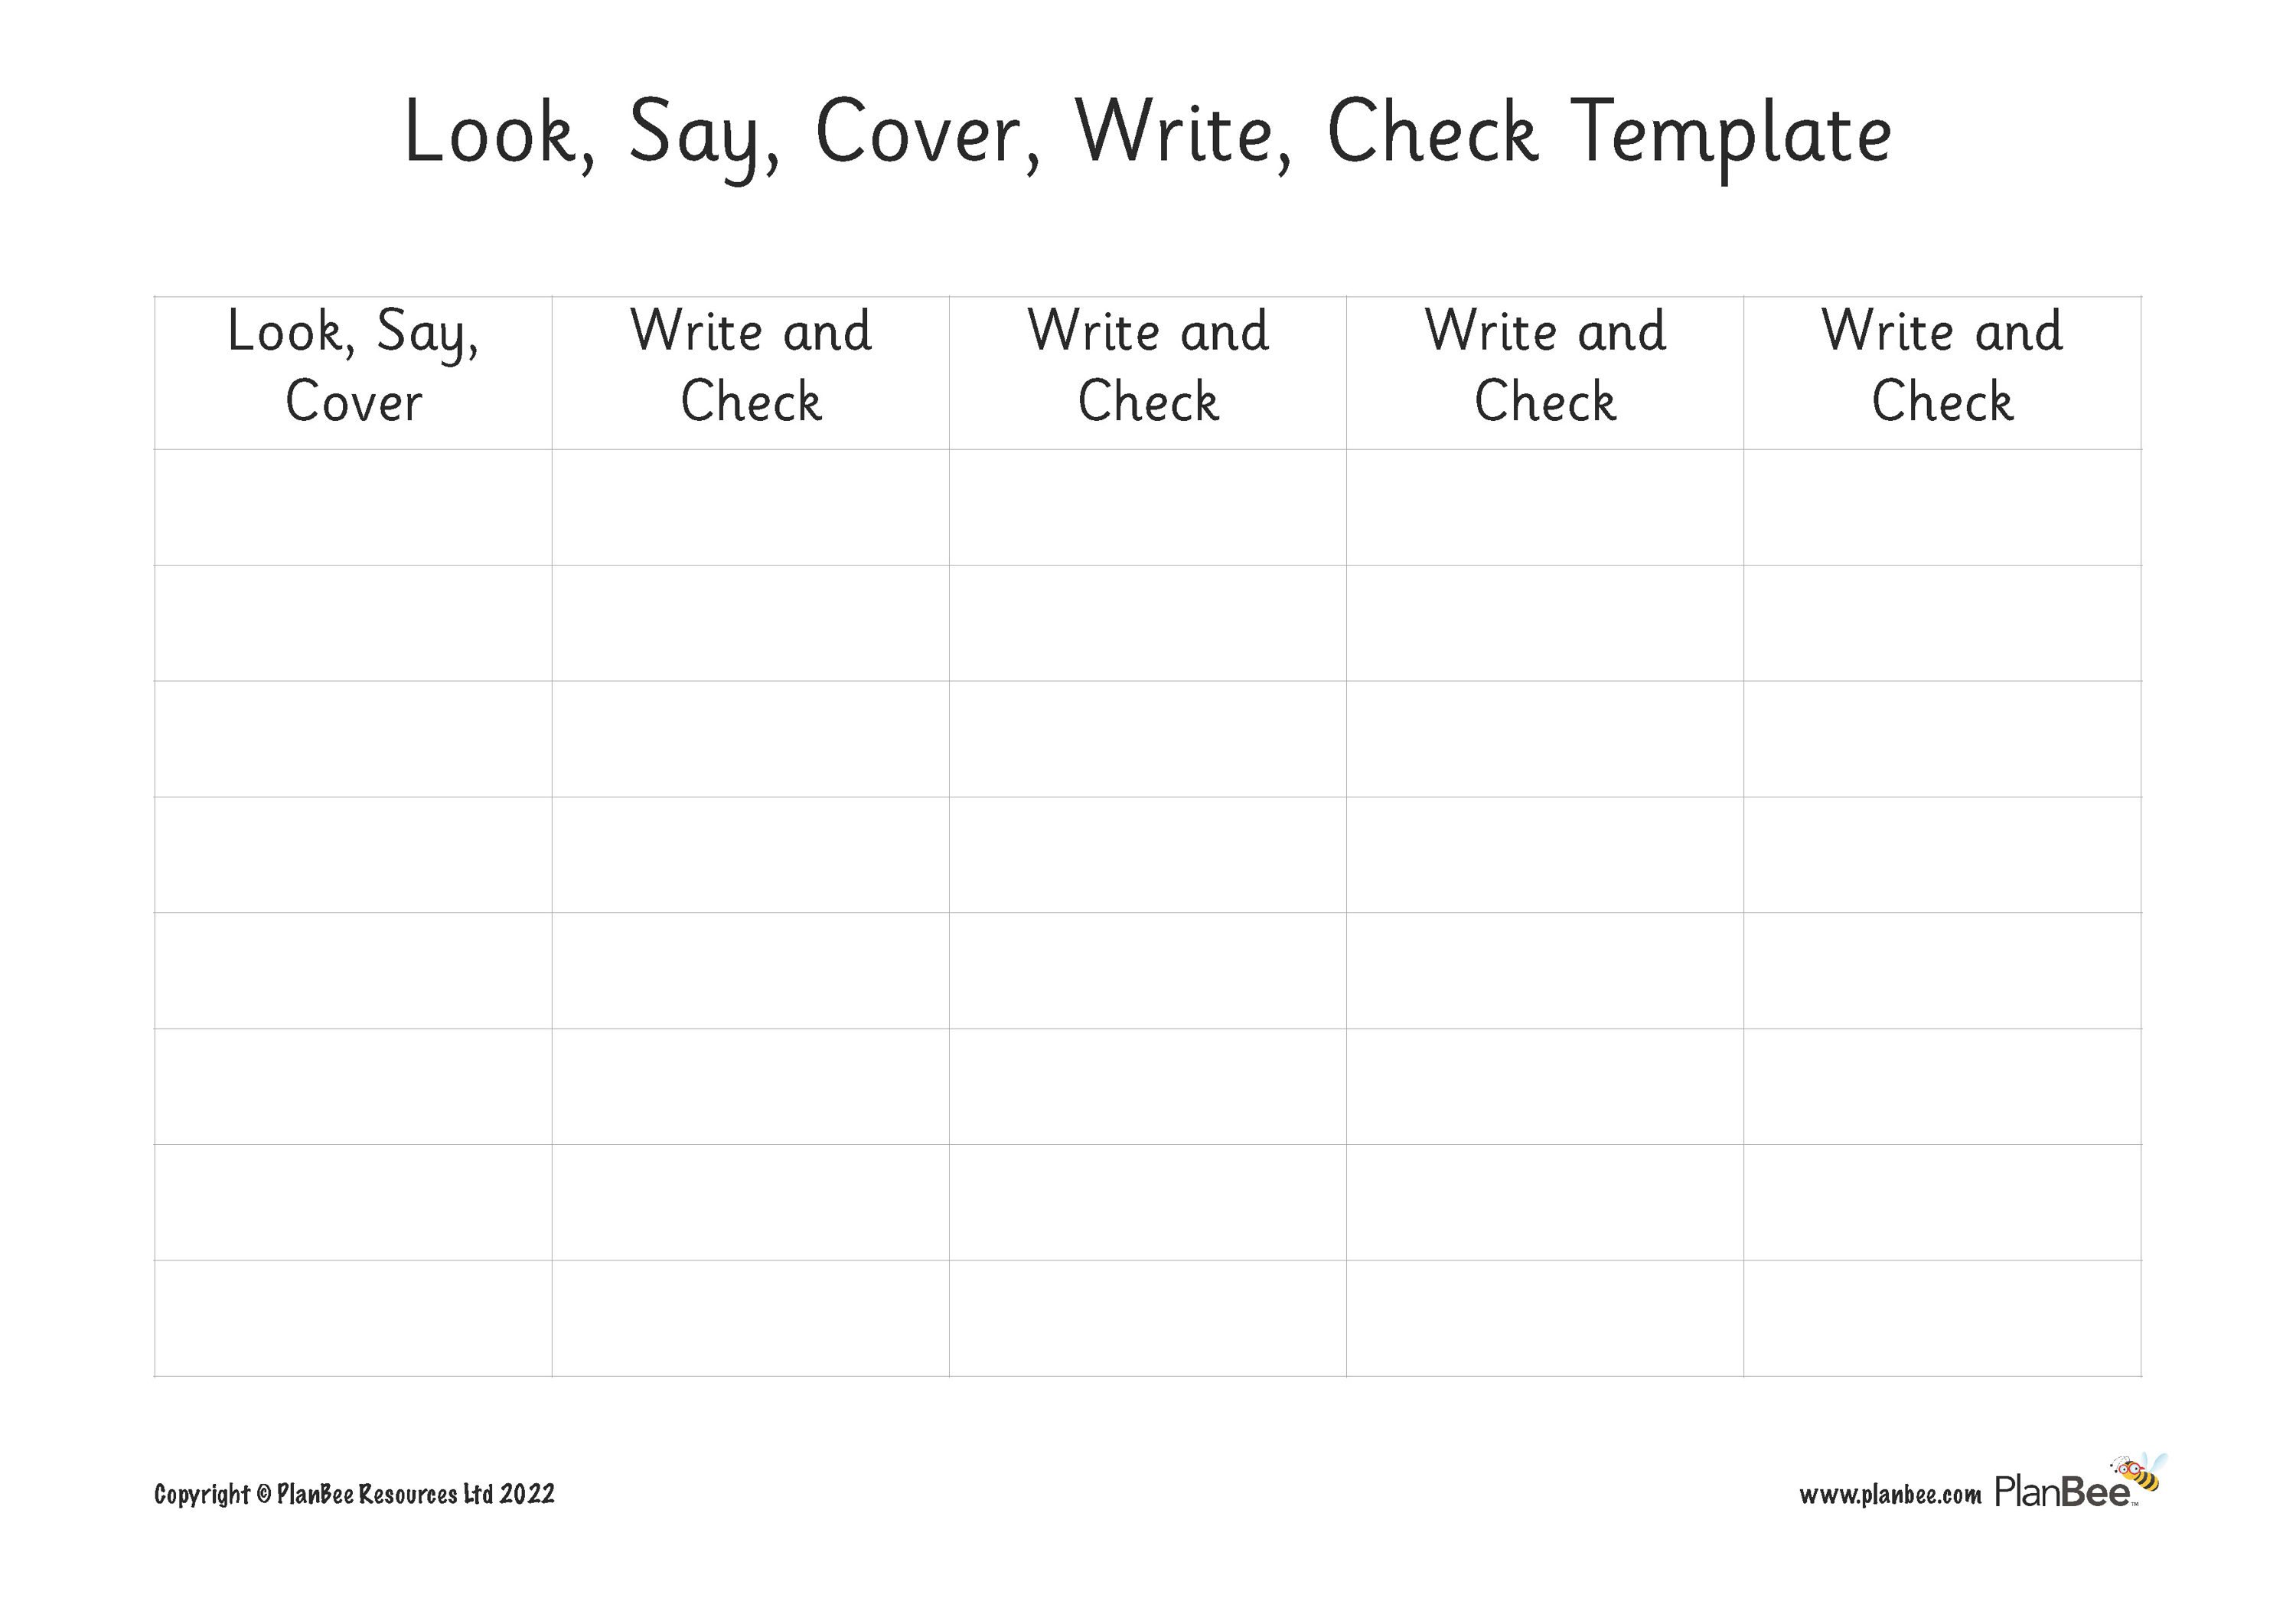 Look, Say, Cover, Write, Check Template